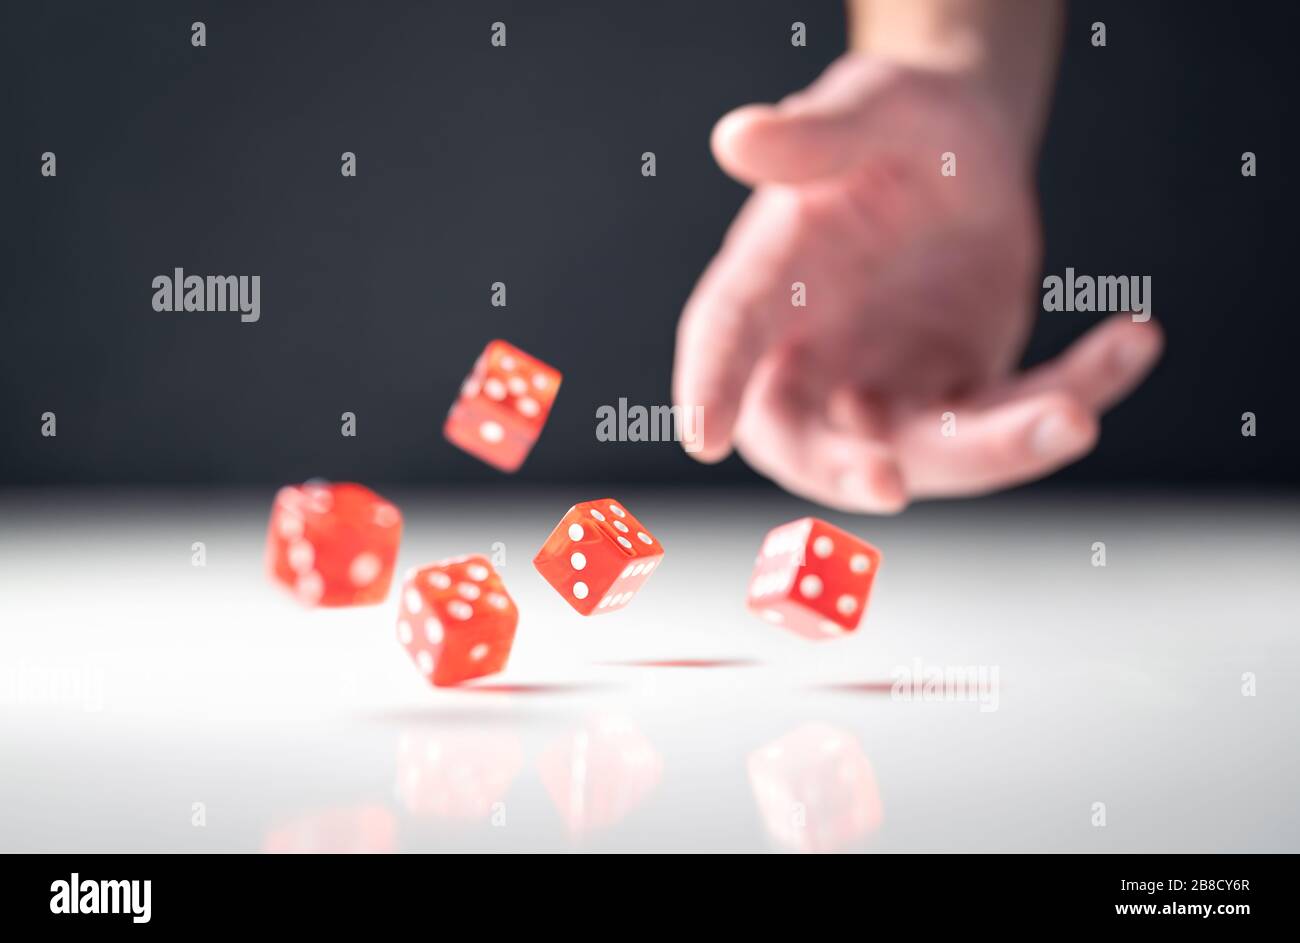 Hand throwing and rolling dice. Gambler tossing five red poker and casino dice on table. Man gambling or playing board game. Risk, luck, betting. Stock Photo